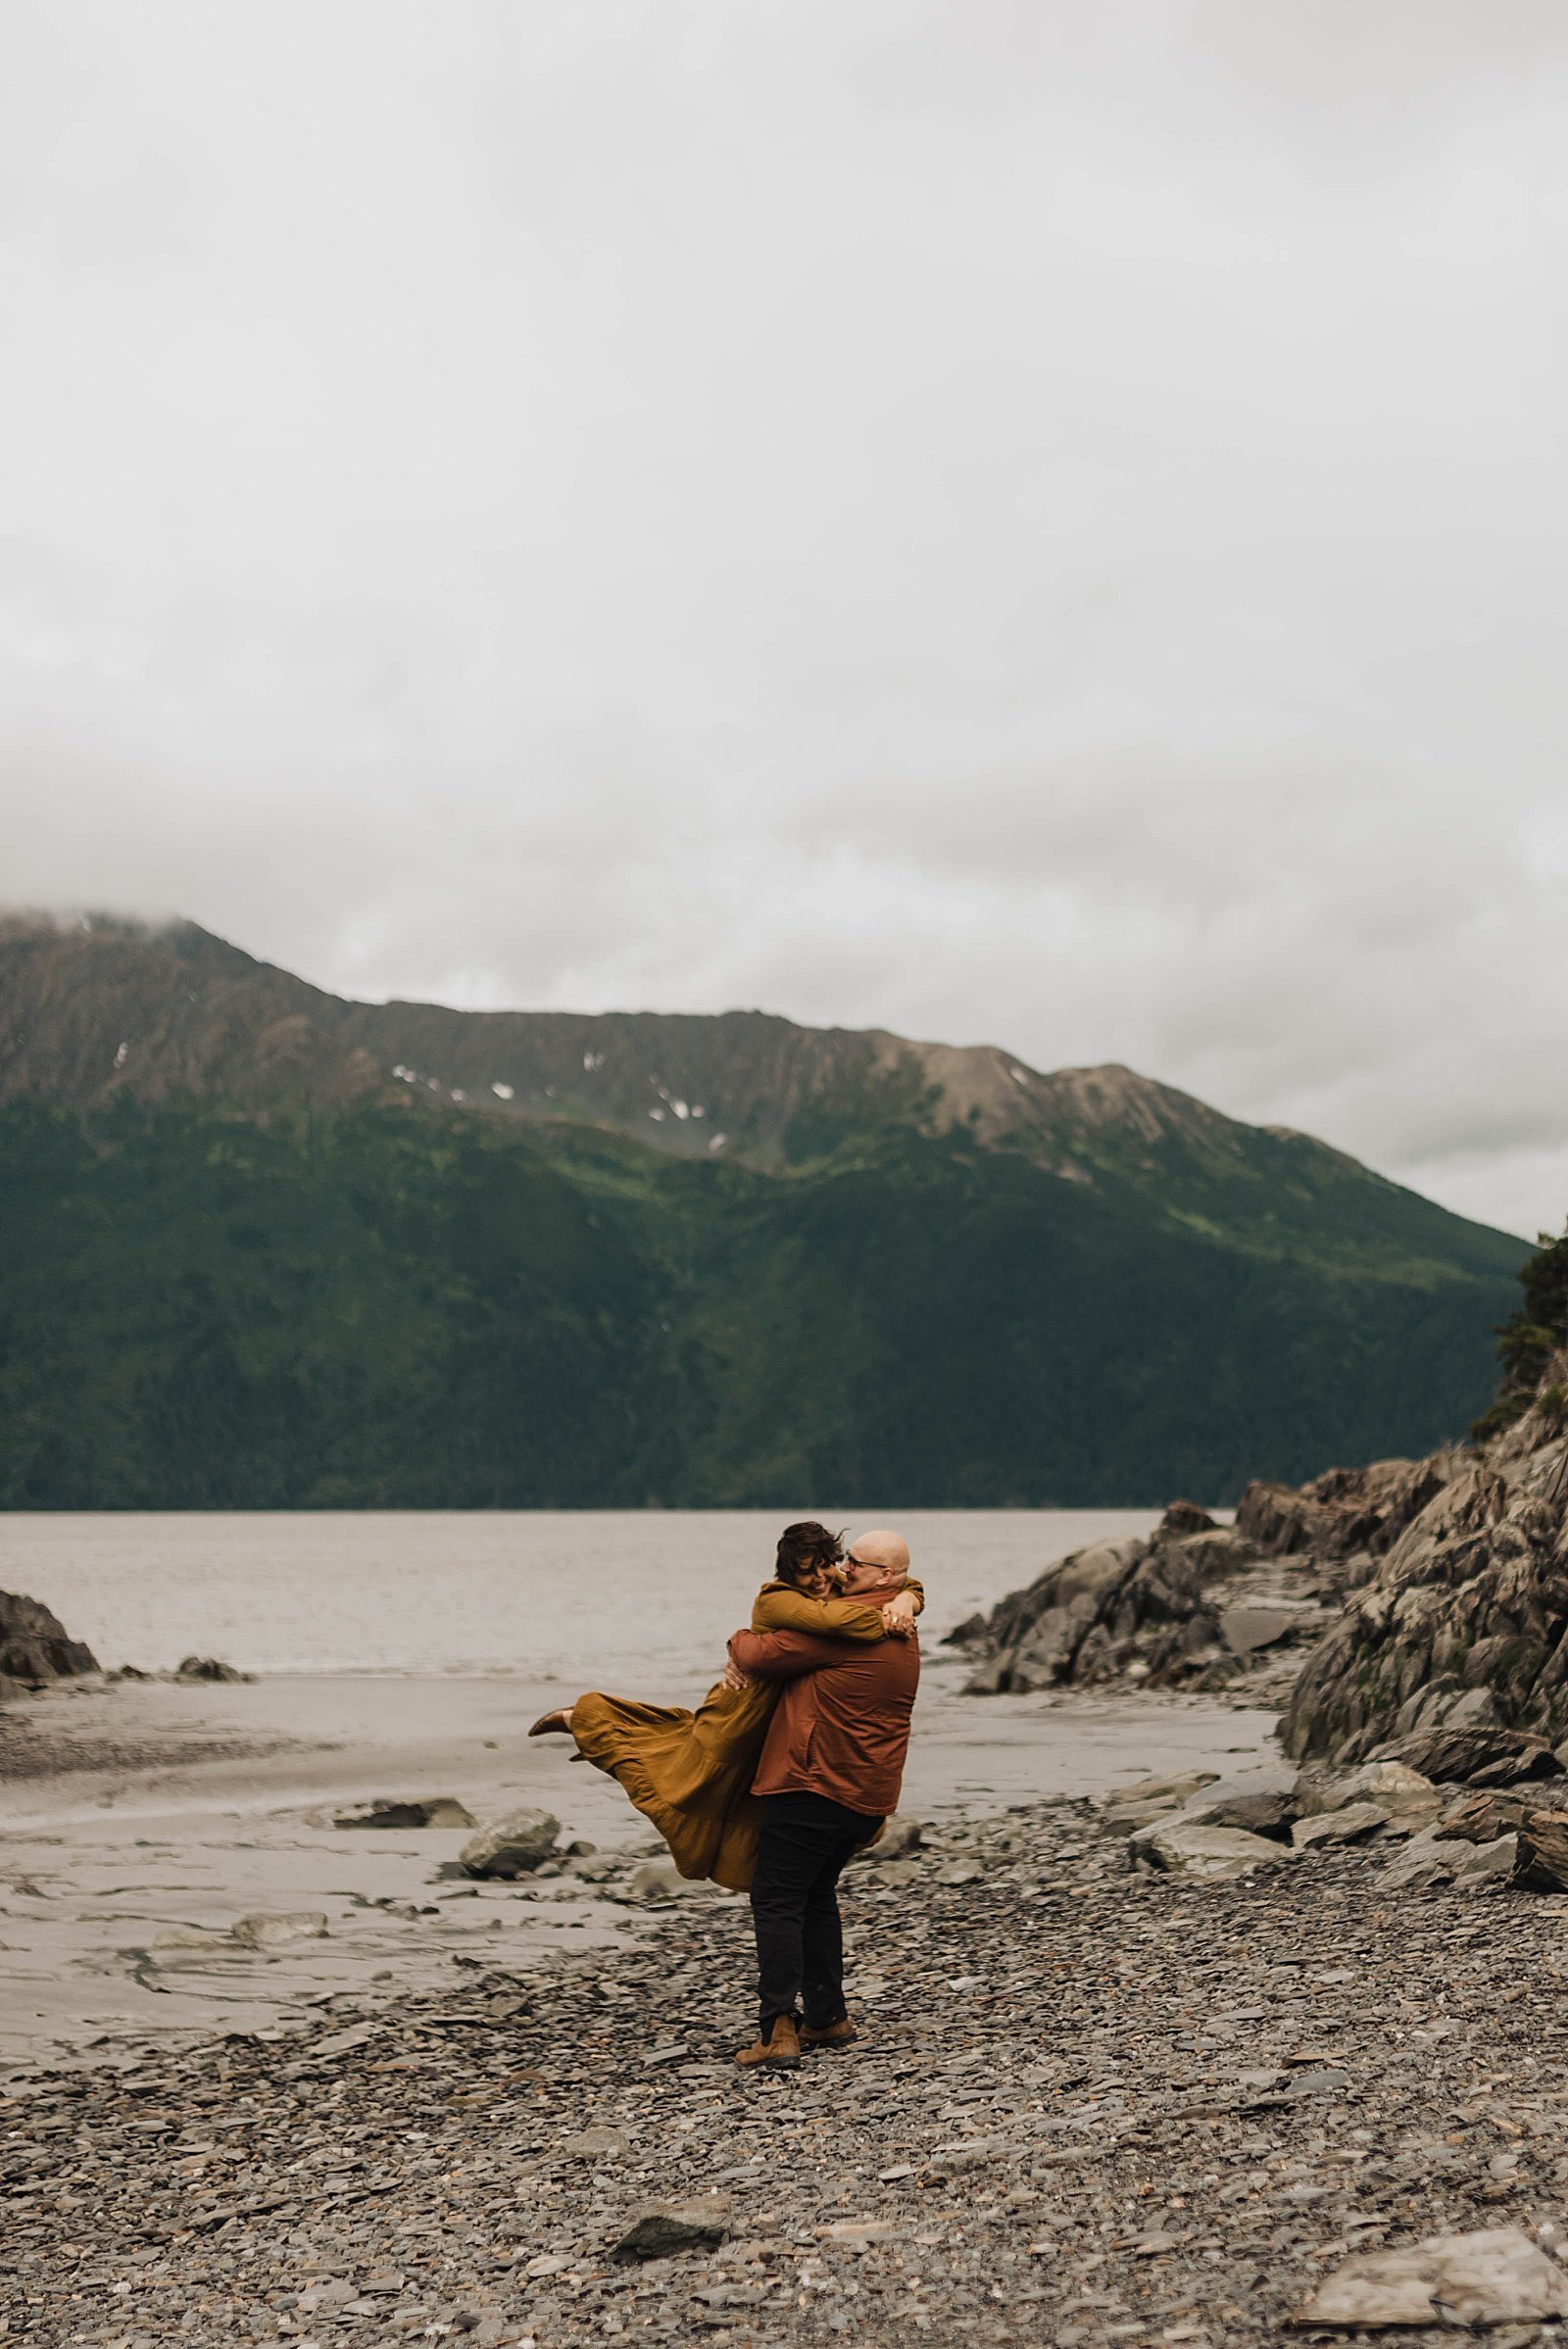  Man spins around his wife with a lake and Alaska mountains in the background.  